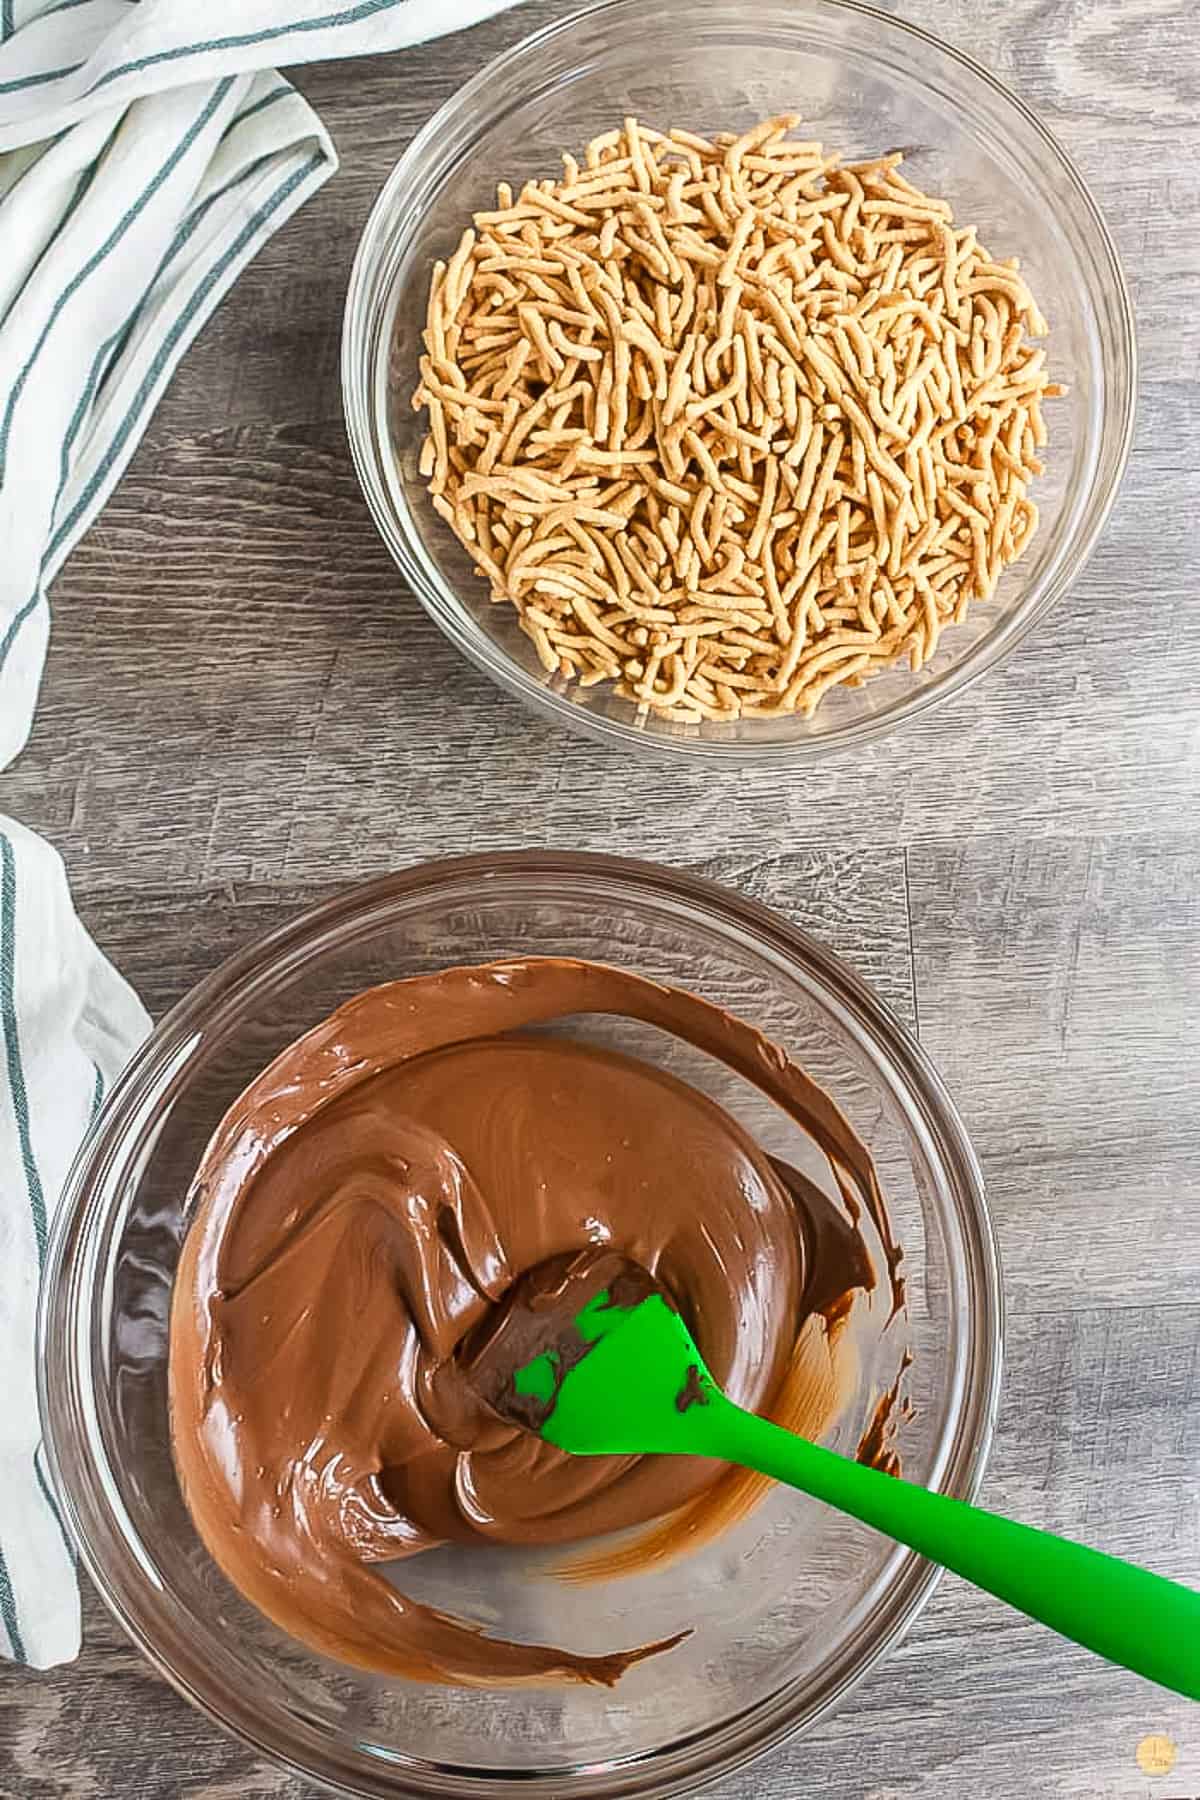 melted chocolate in a bowl with a green spatula